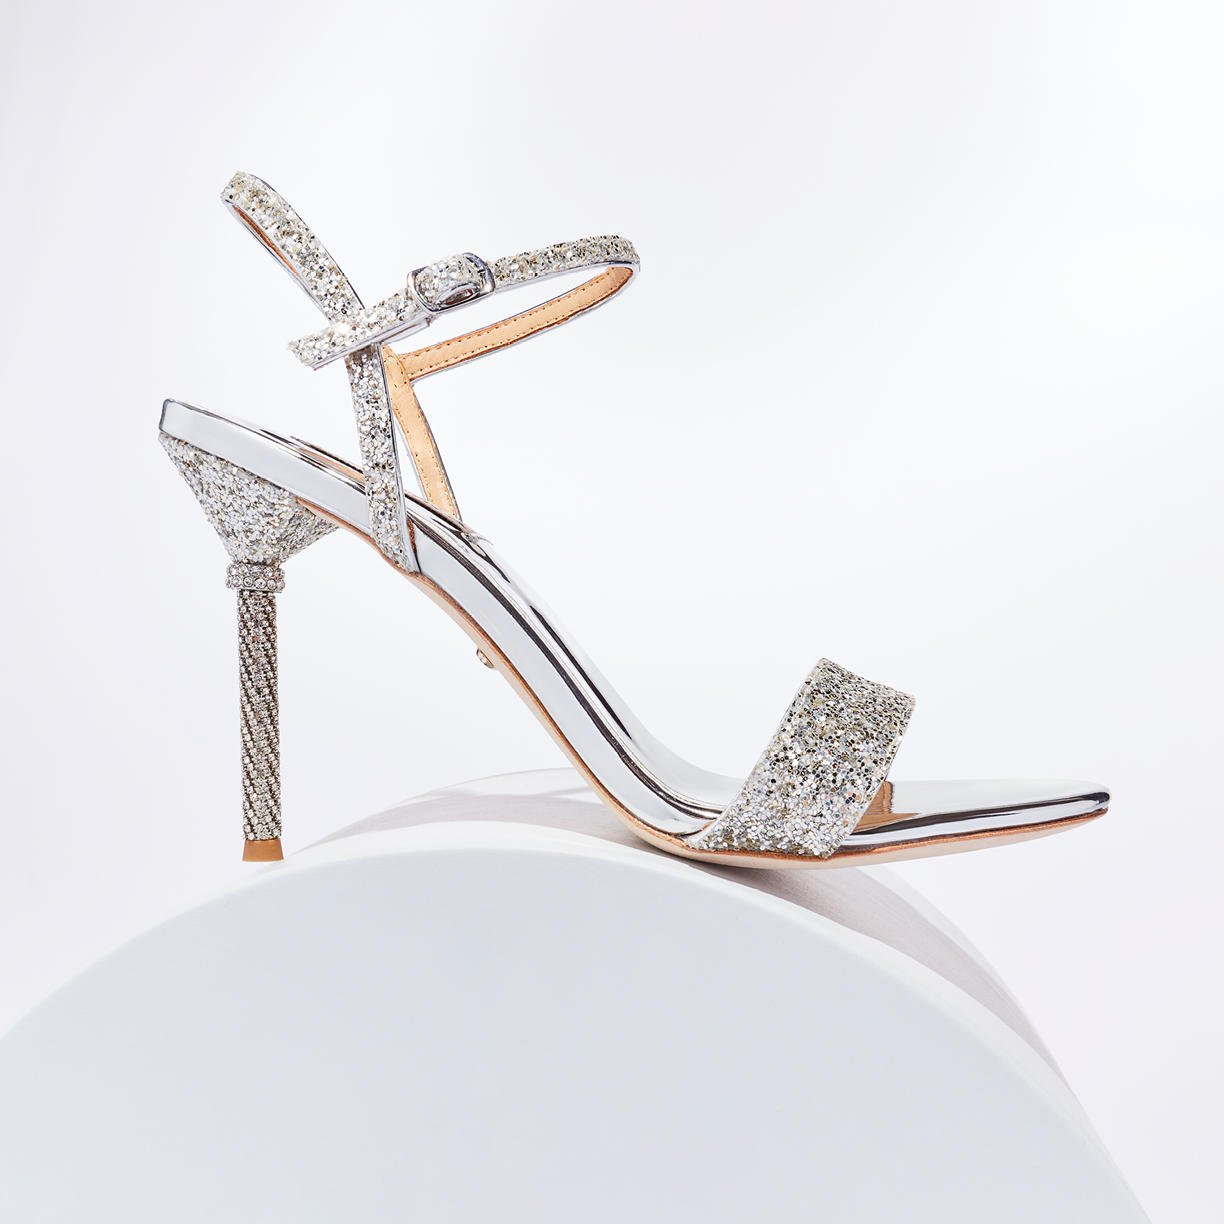 Bridal Shoes & Bags Up to 60% Off